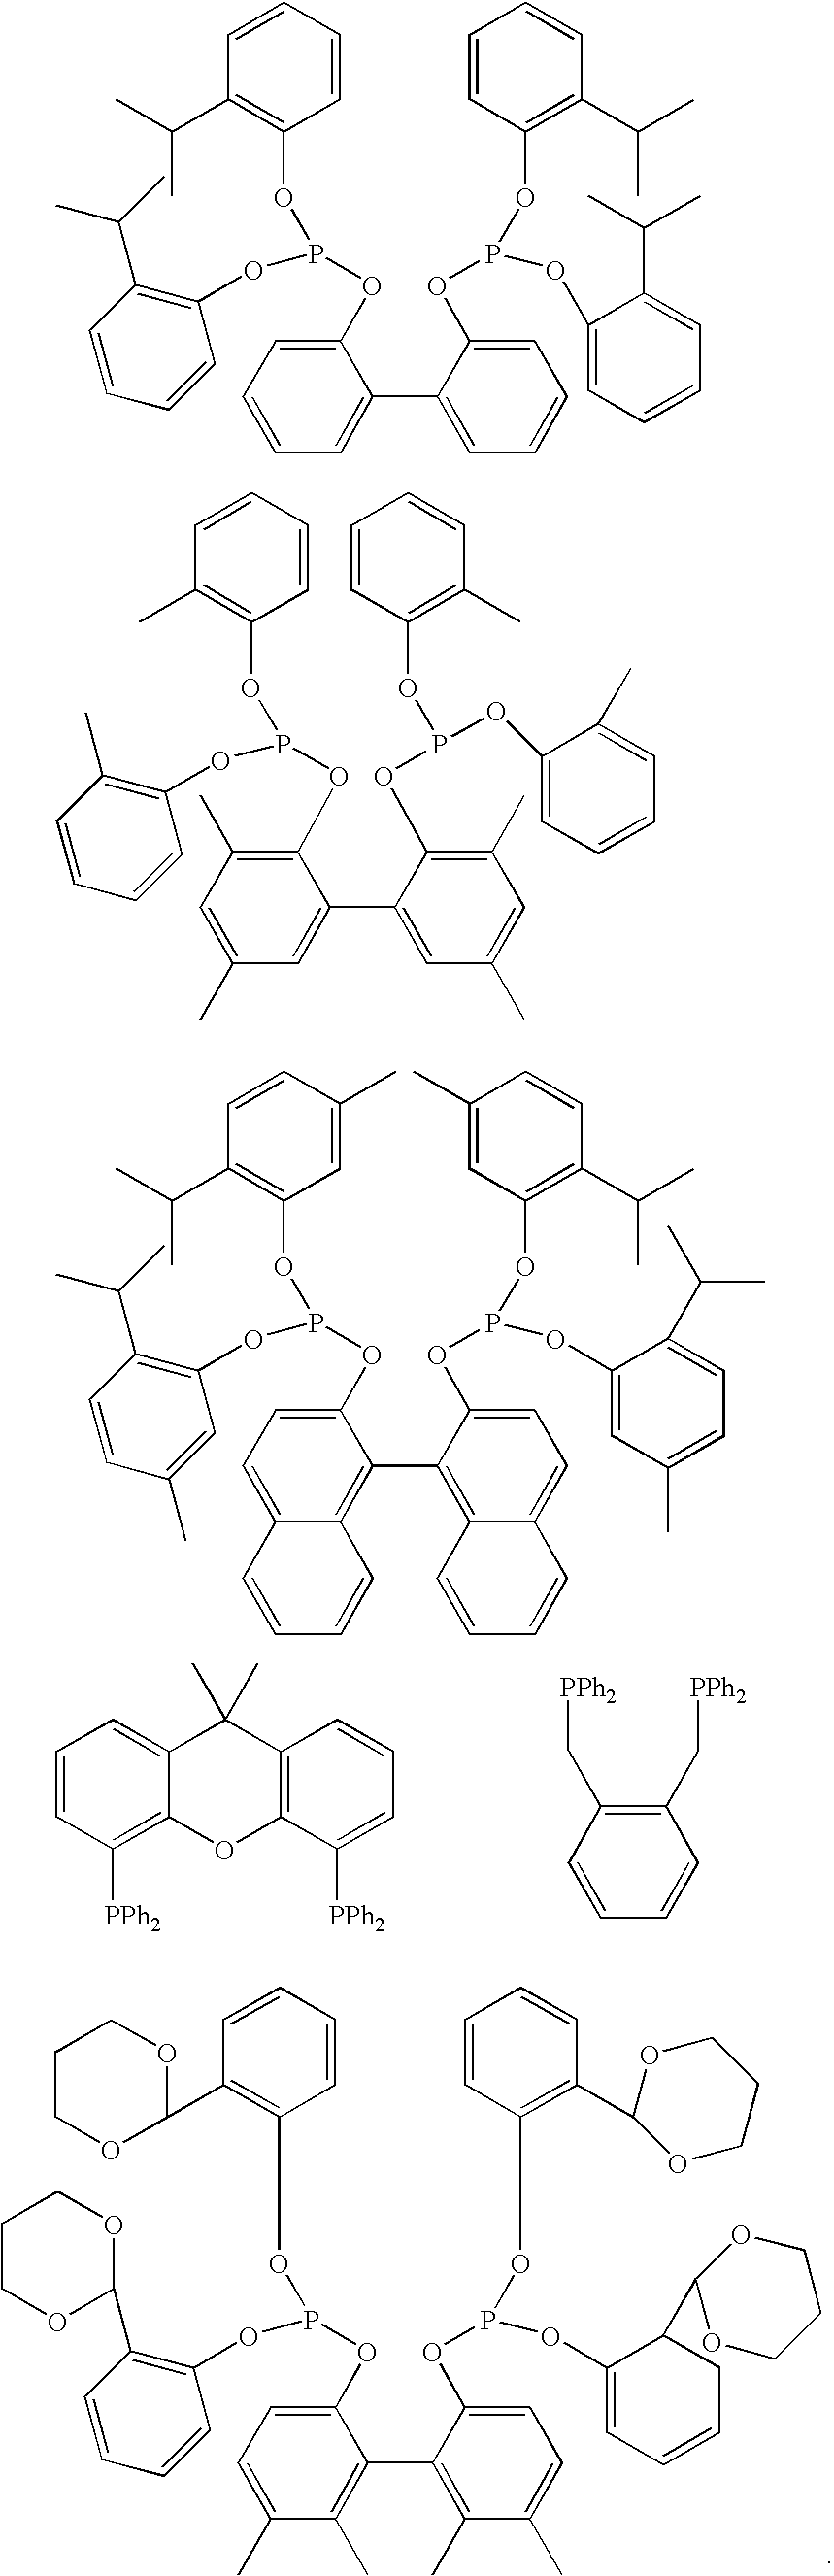 Process of synthesis of compounds having nitrile functions from ethylenically unsaturated compounds